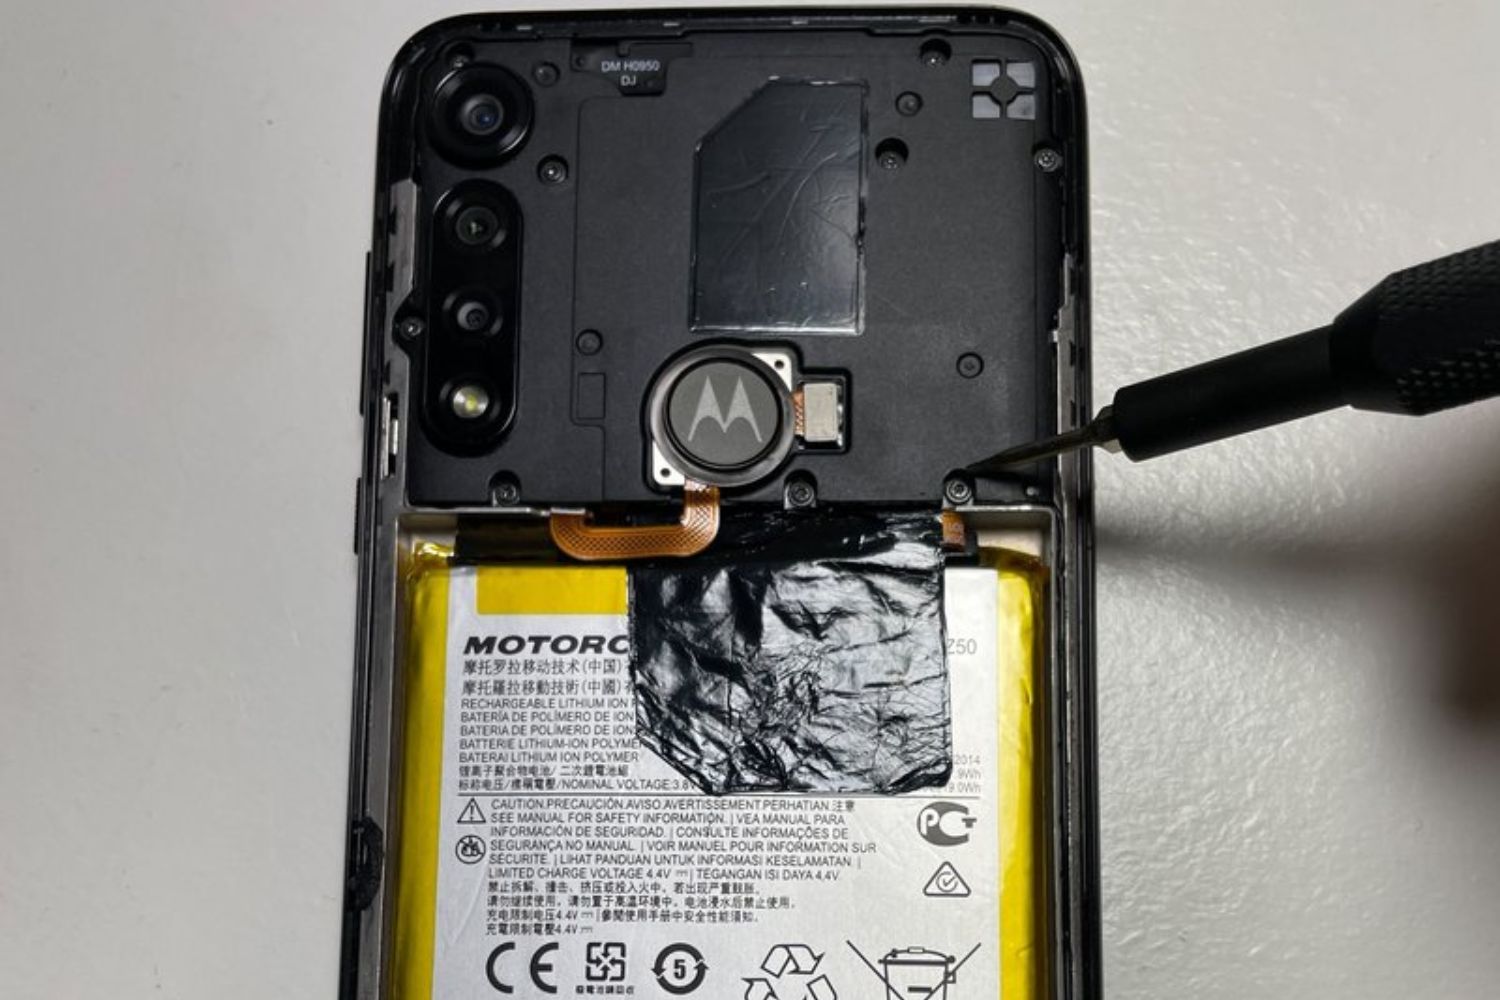 remove-battery-from-moto-g-power-quick-guide